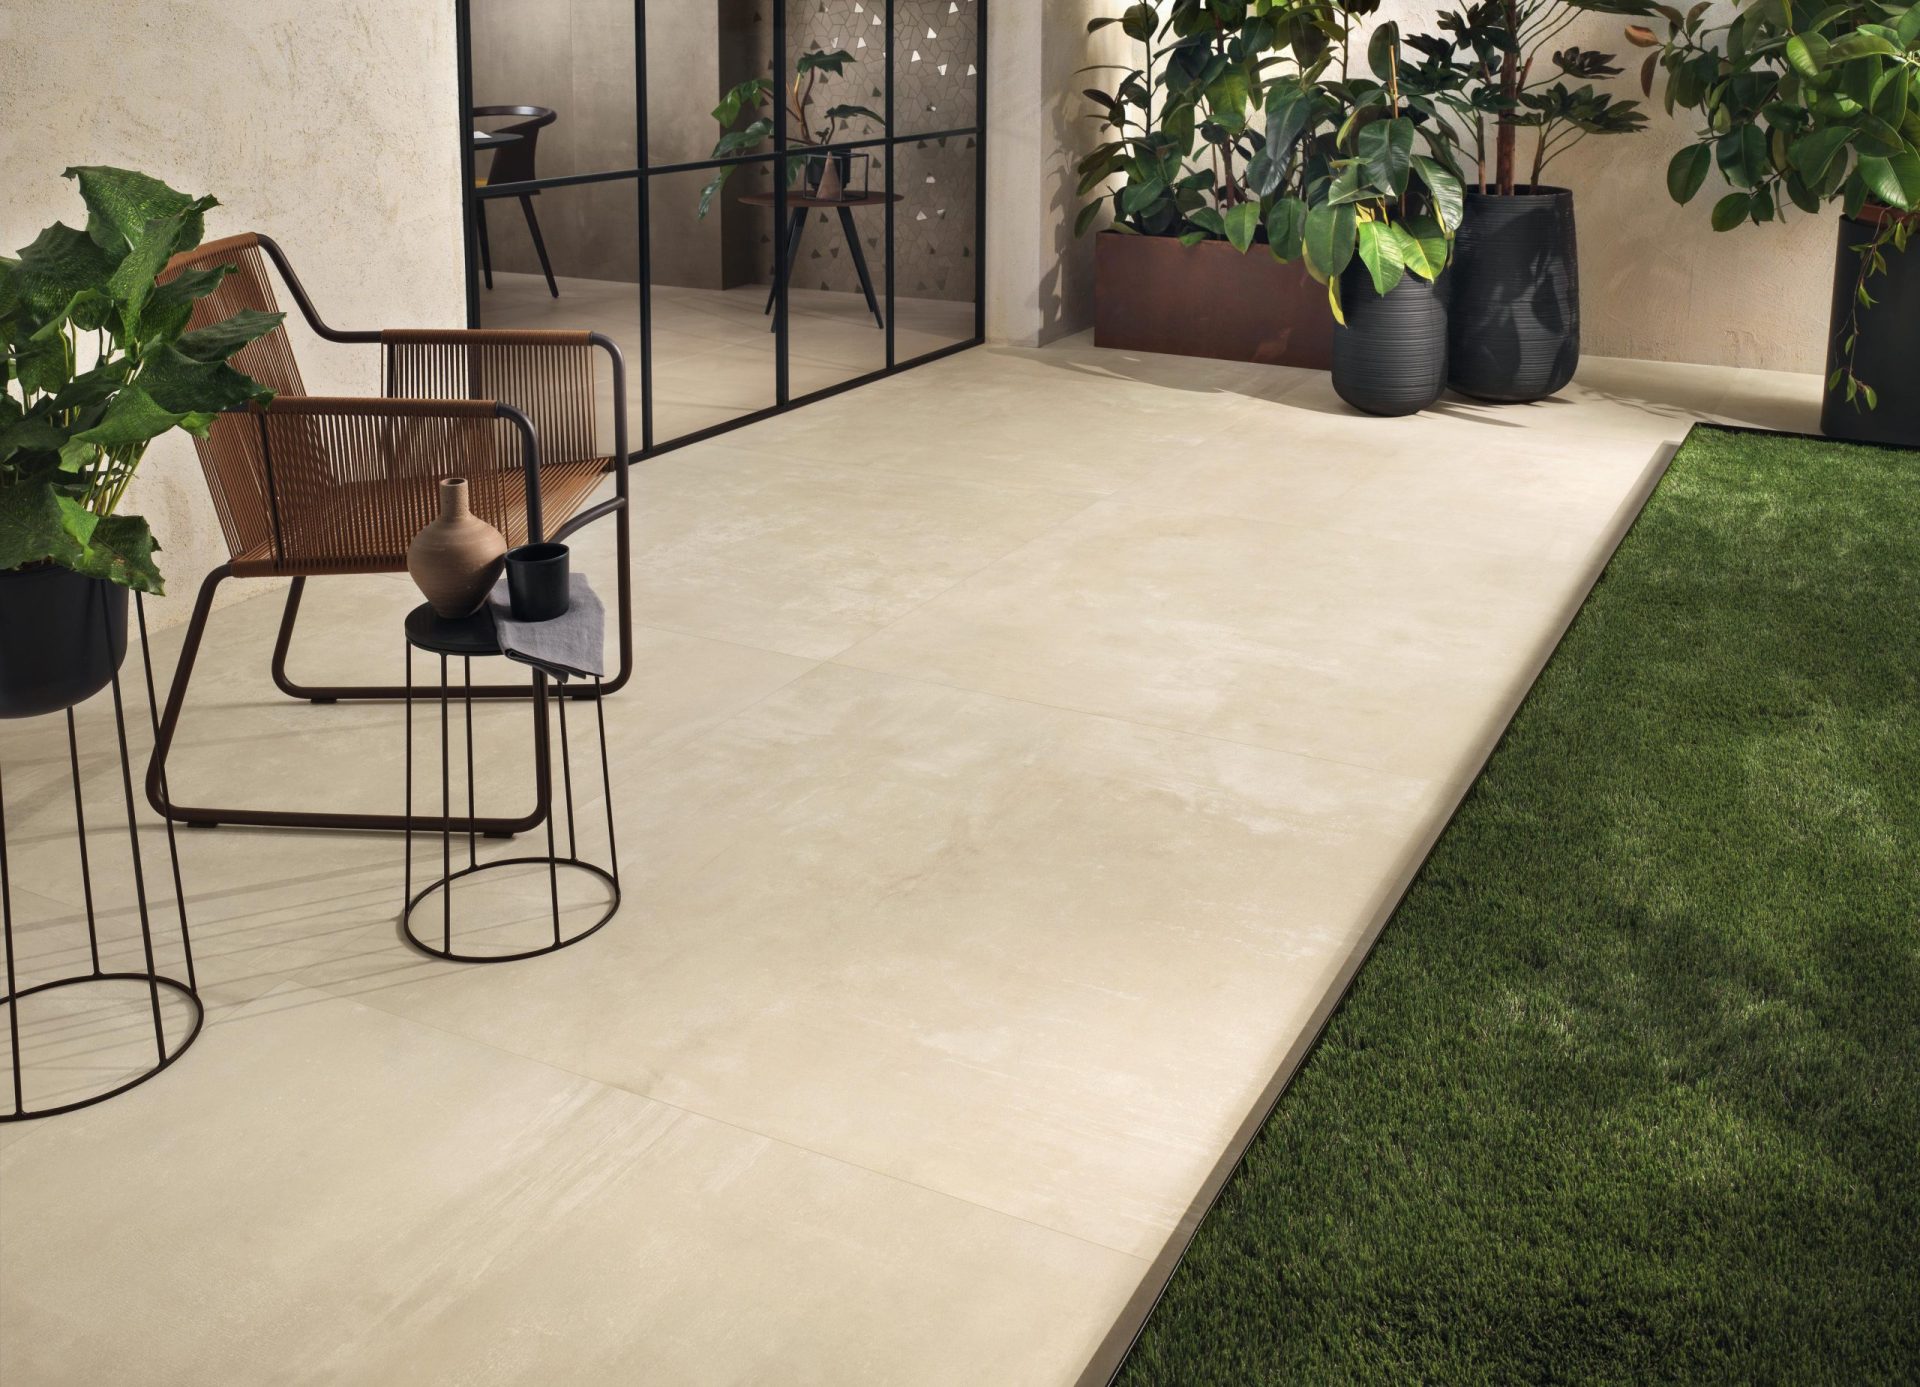 Ivory Boost Pro porcelain tile on floor in outdoor space.